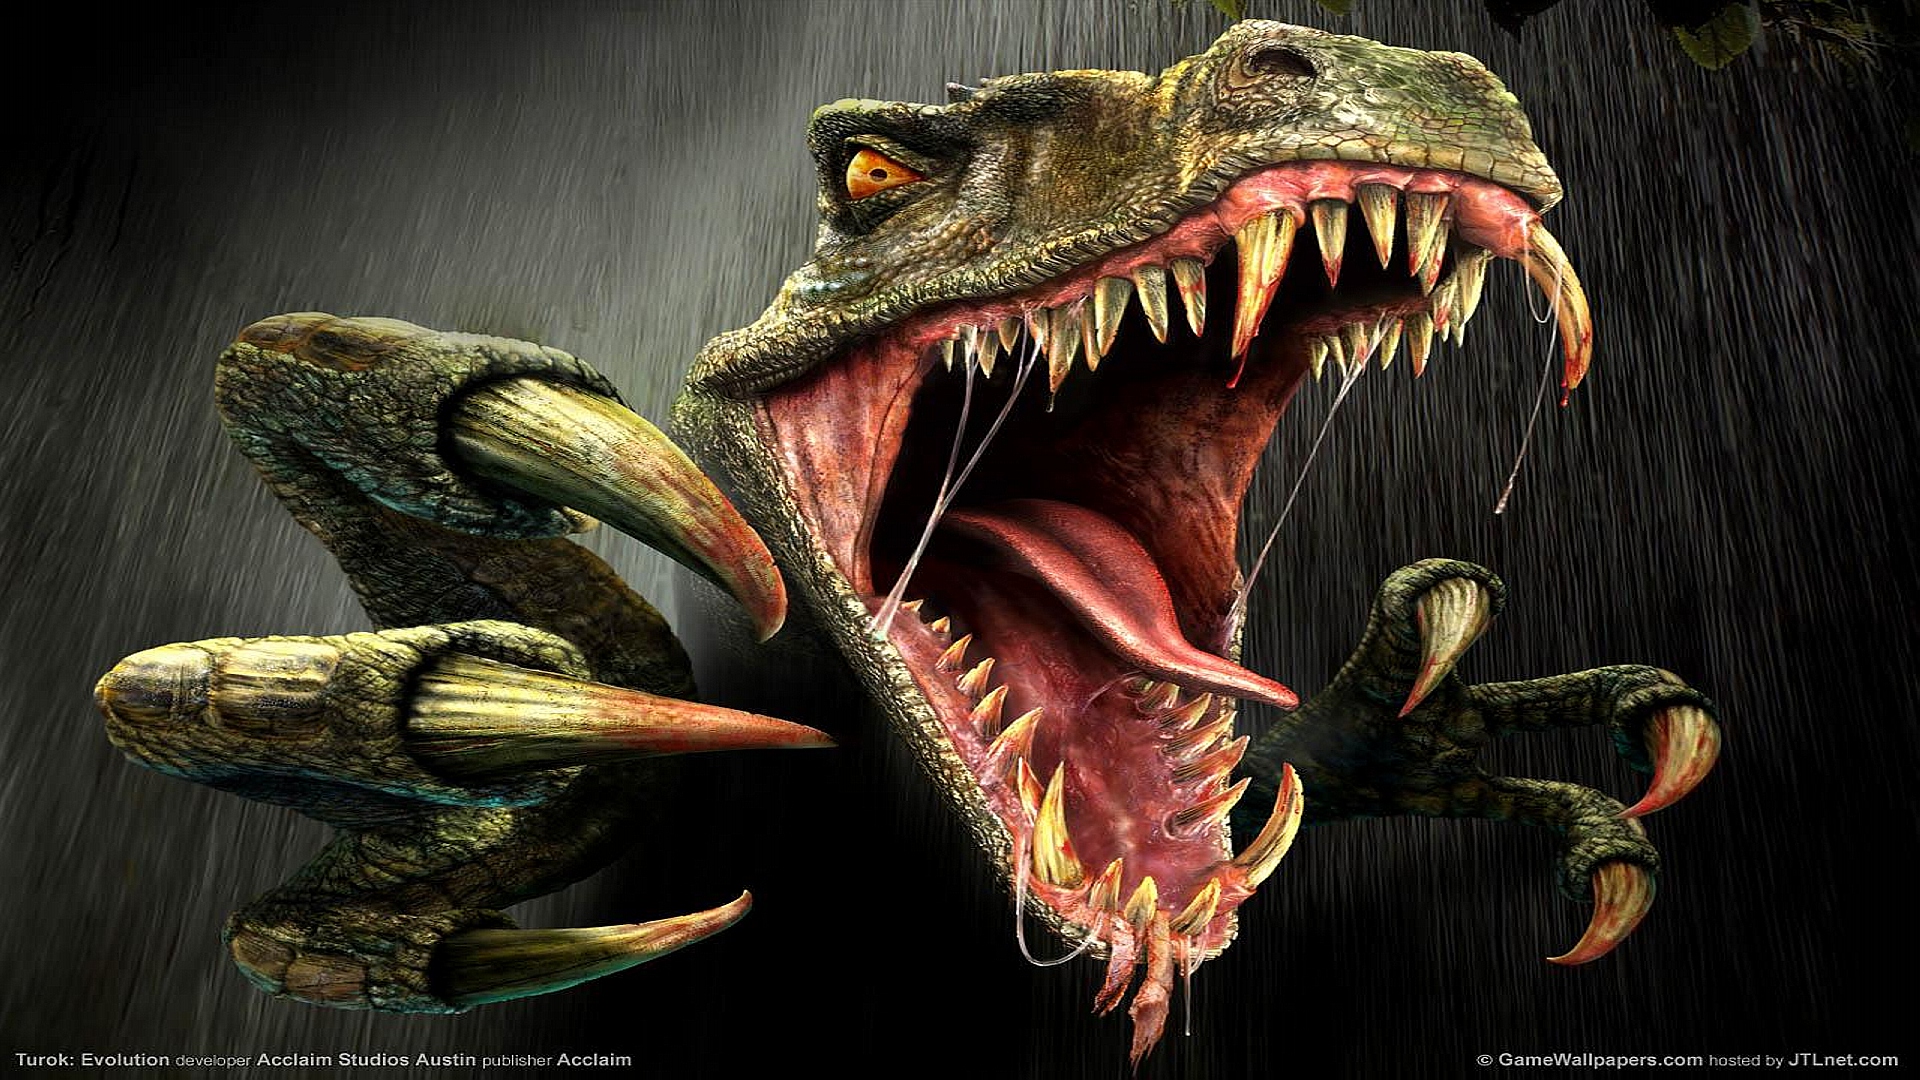 Dinosaur Images Miscellaneous Other Top Wallpaper 1920x1080 Full HD